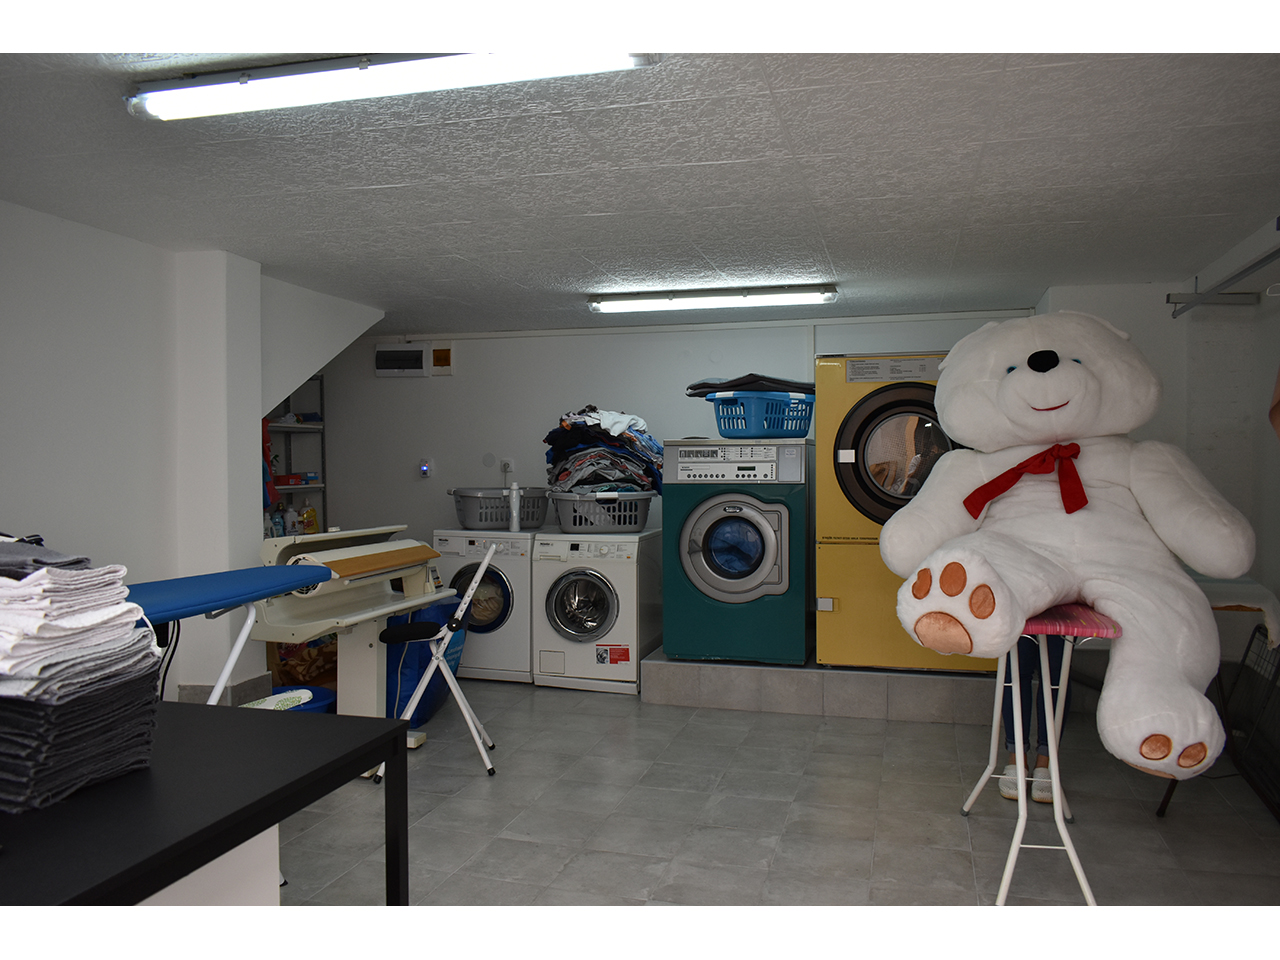 DRY CLEANING AND LAUNDRY KRISTALINO Dry-cleaning Beograd